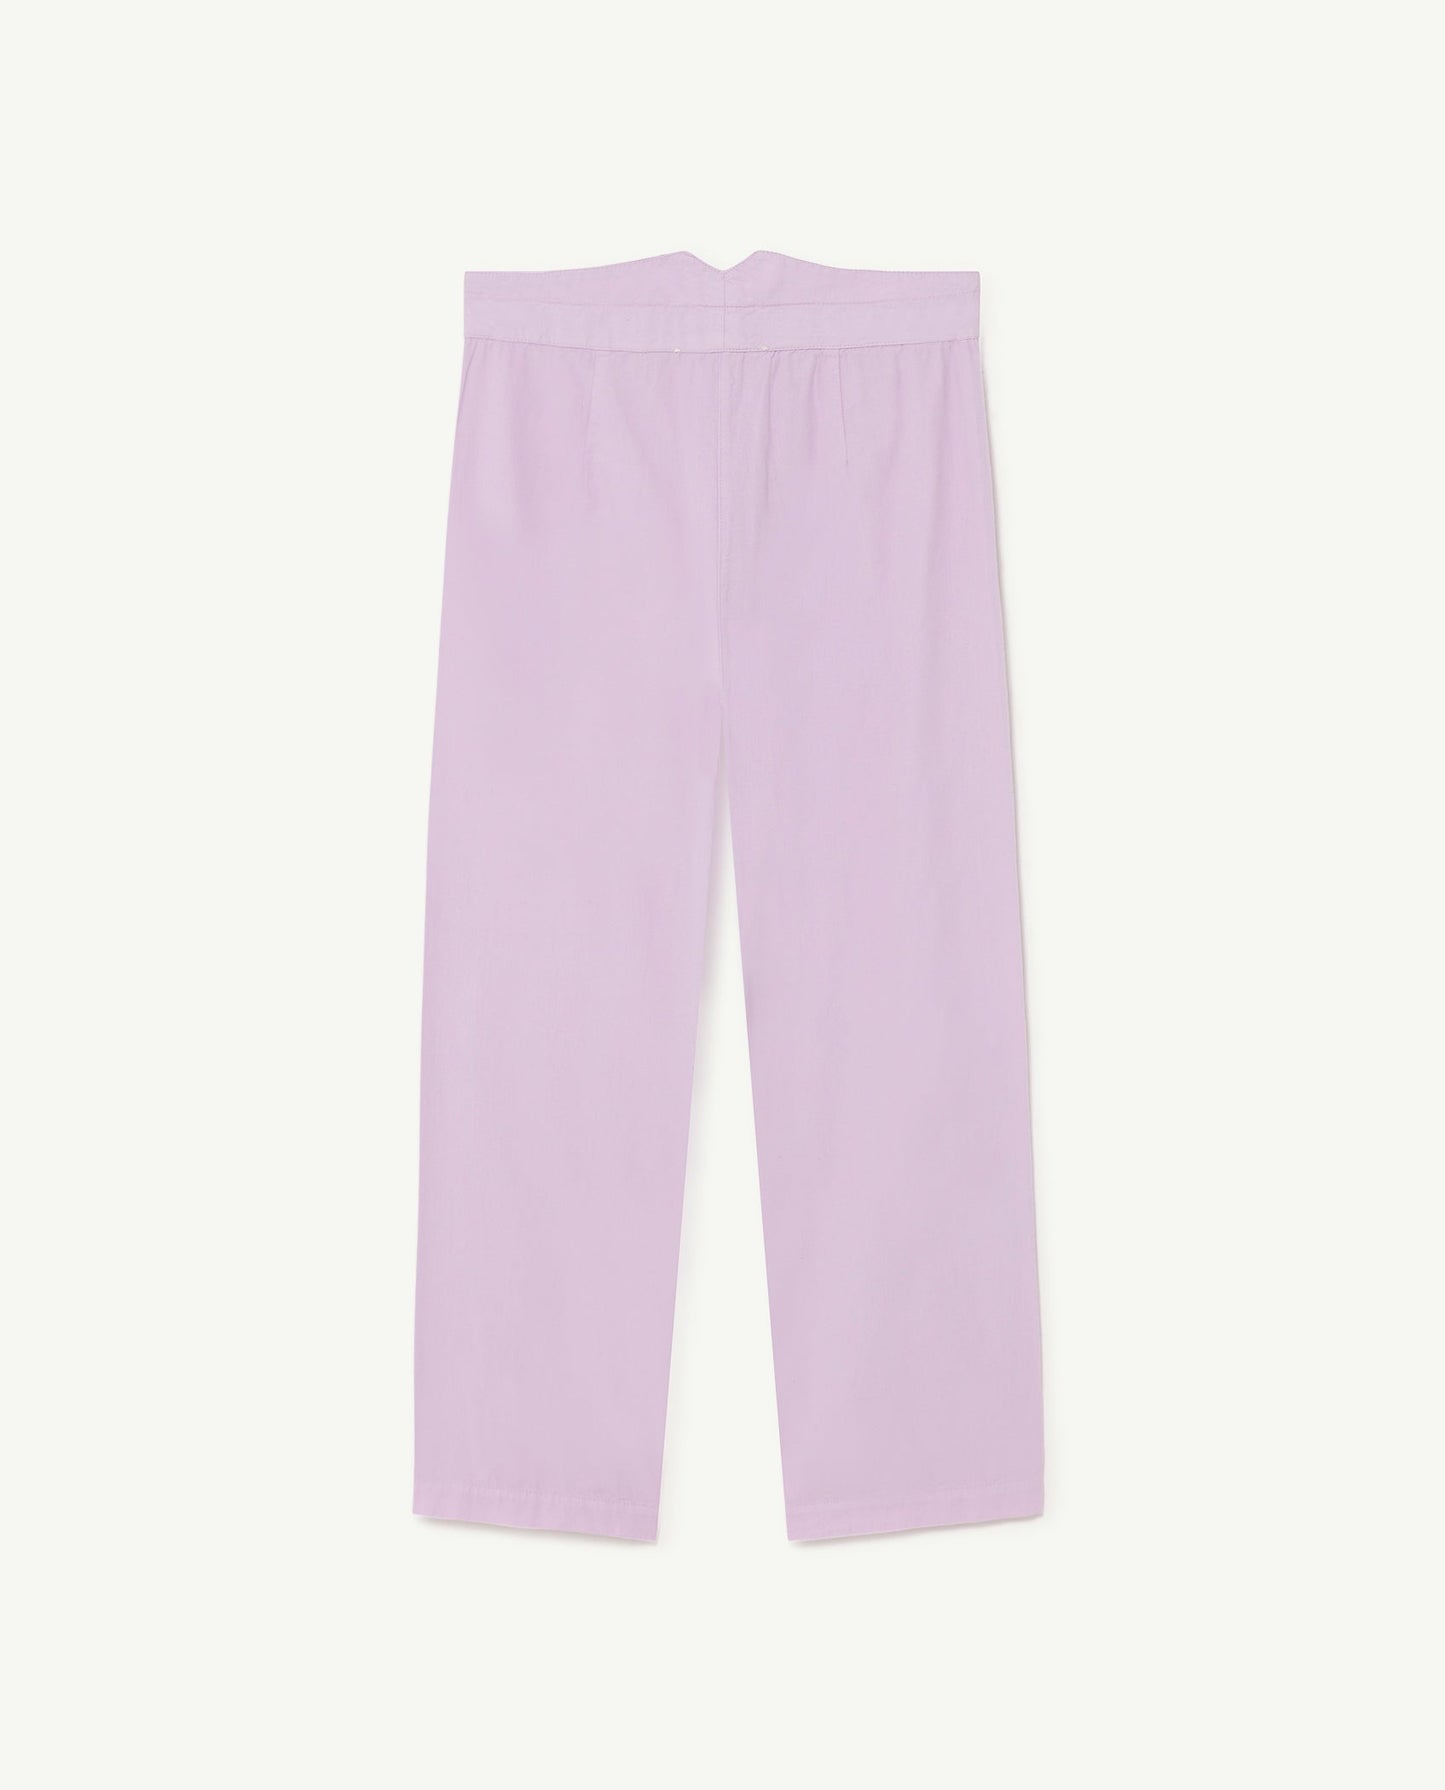 Porcupine pants Lilac the animals Trousers The Animals Observatory 